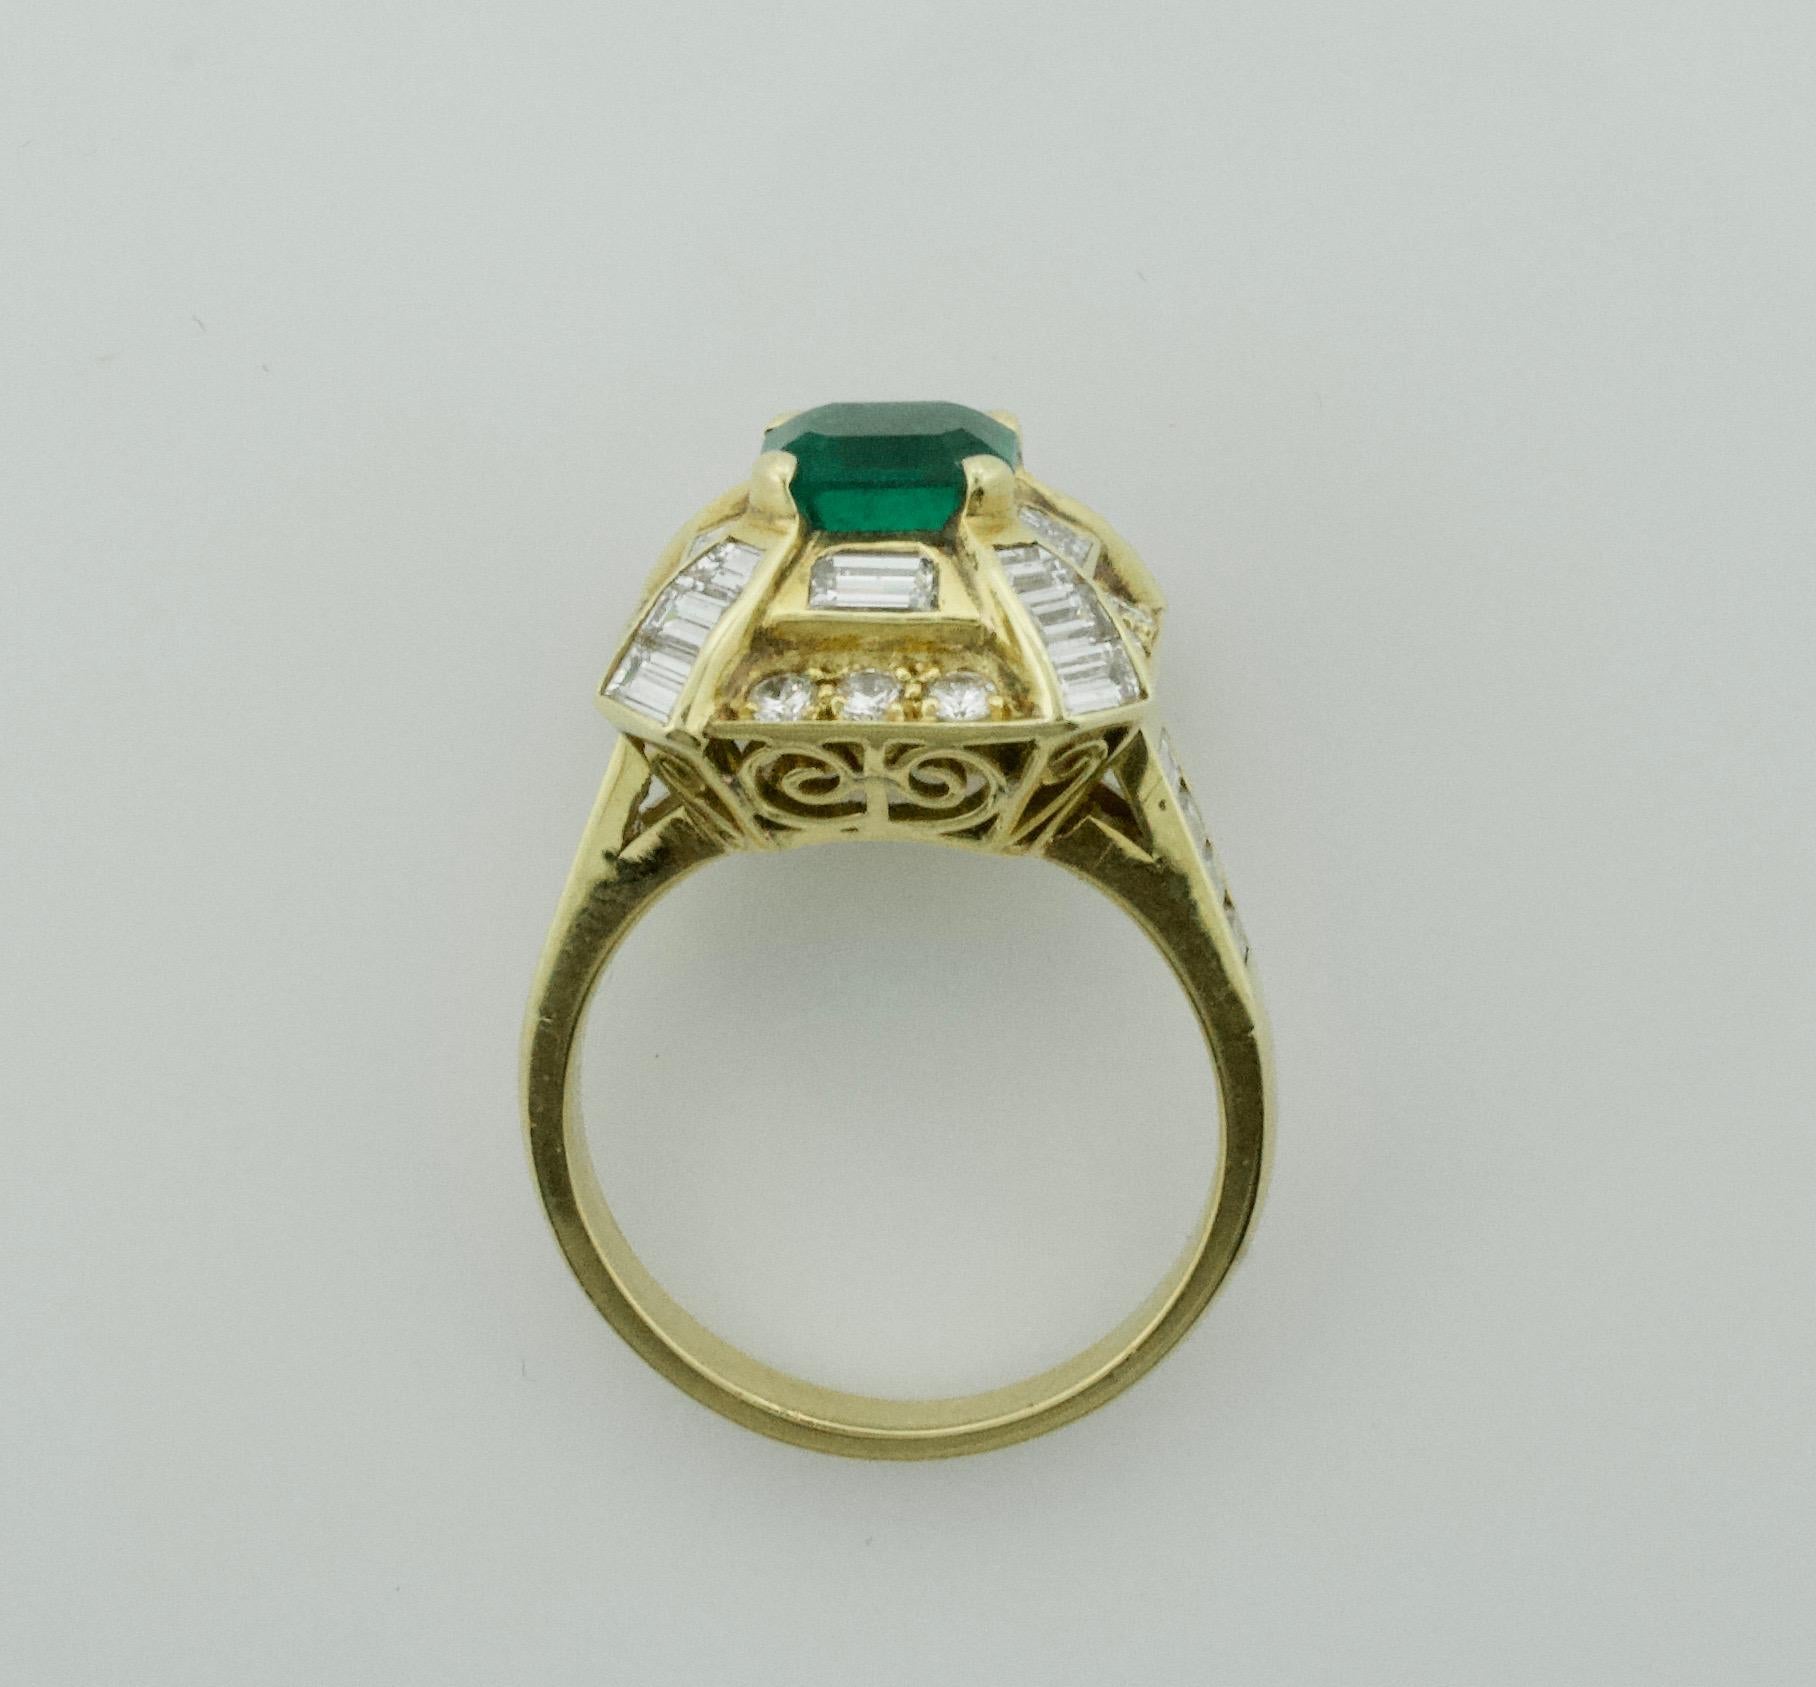 Modern Emerald and Diamond Ring by Terrell and Zimmelman in 18k
One Emerald Cut Emerald  weighing 1.19 carats
Twenty Four Baguette  Cut Diamonds weighing 1.57 carats
Twelve Round Brilliant Cut Diamonds weighing .31 carats approximately
Total 1.88 in